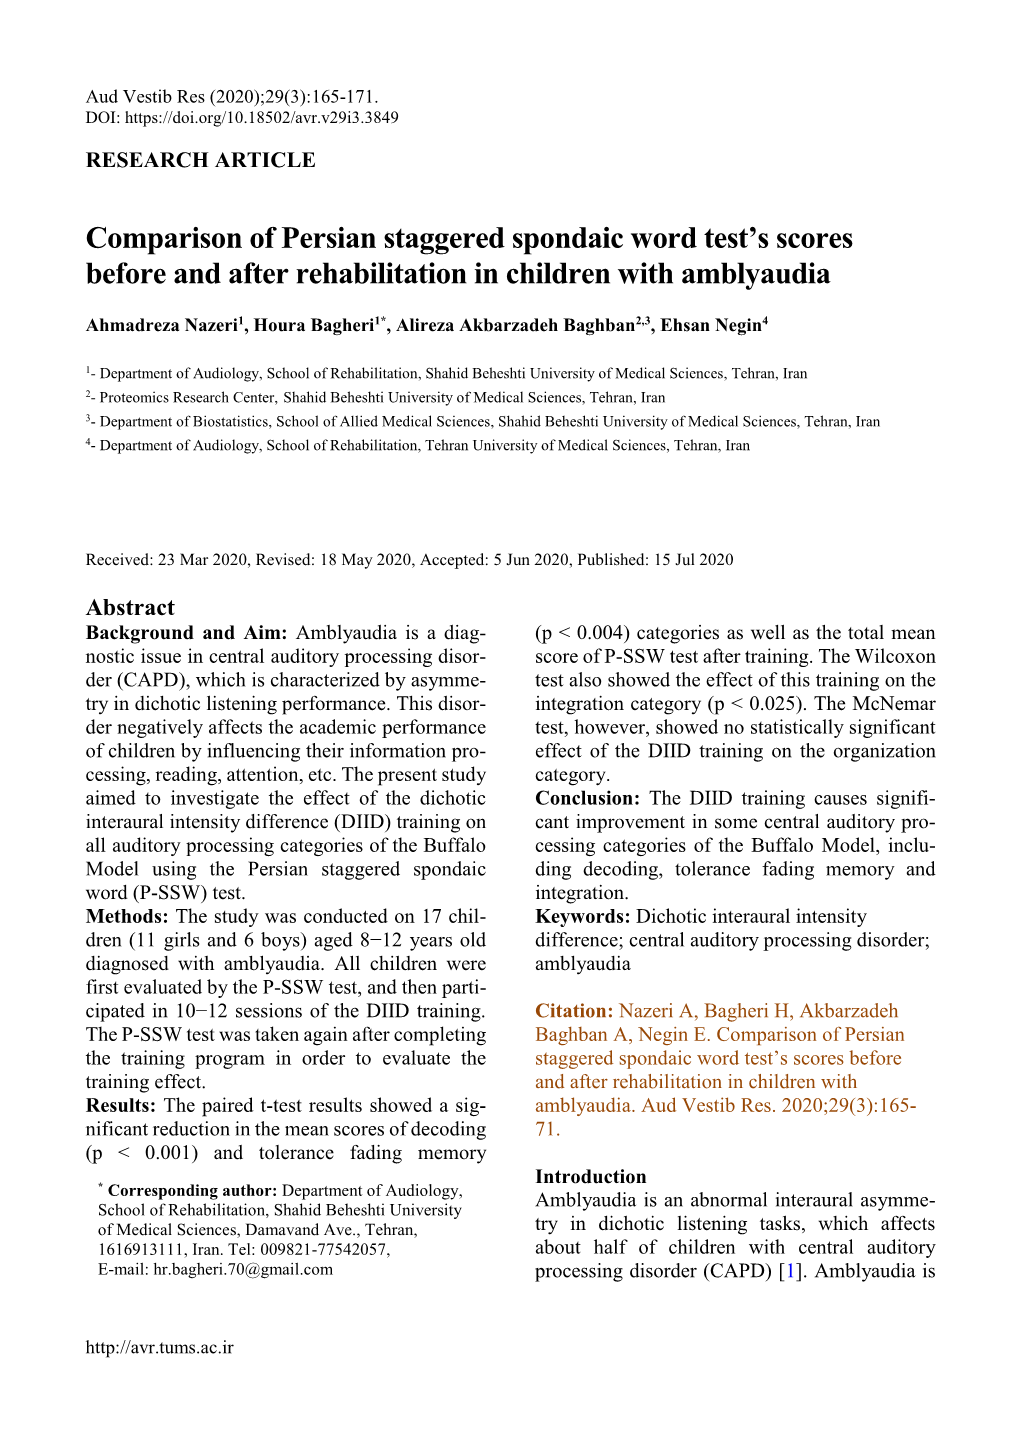 Comparison of Persian Staggered Spondaic Word Test's Scores Before and After Rehabilitation in Children with Amblyaudia